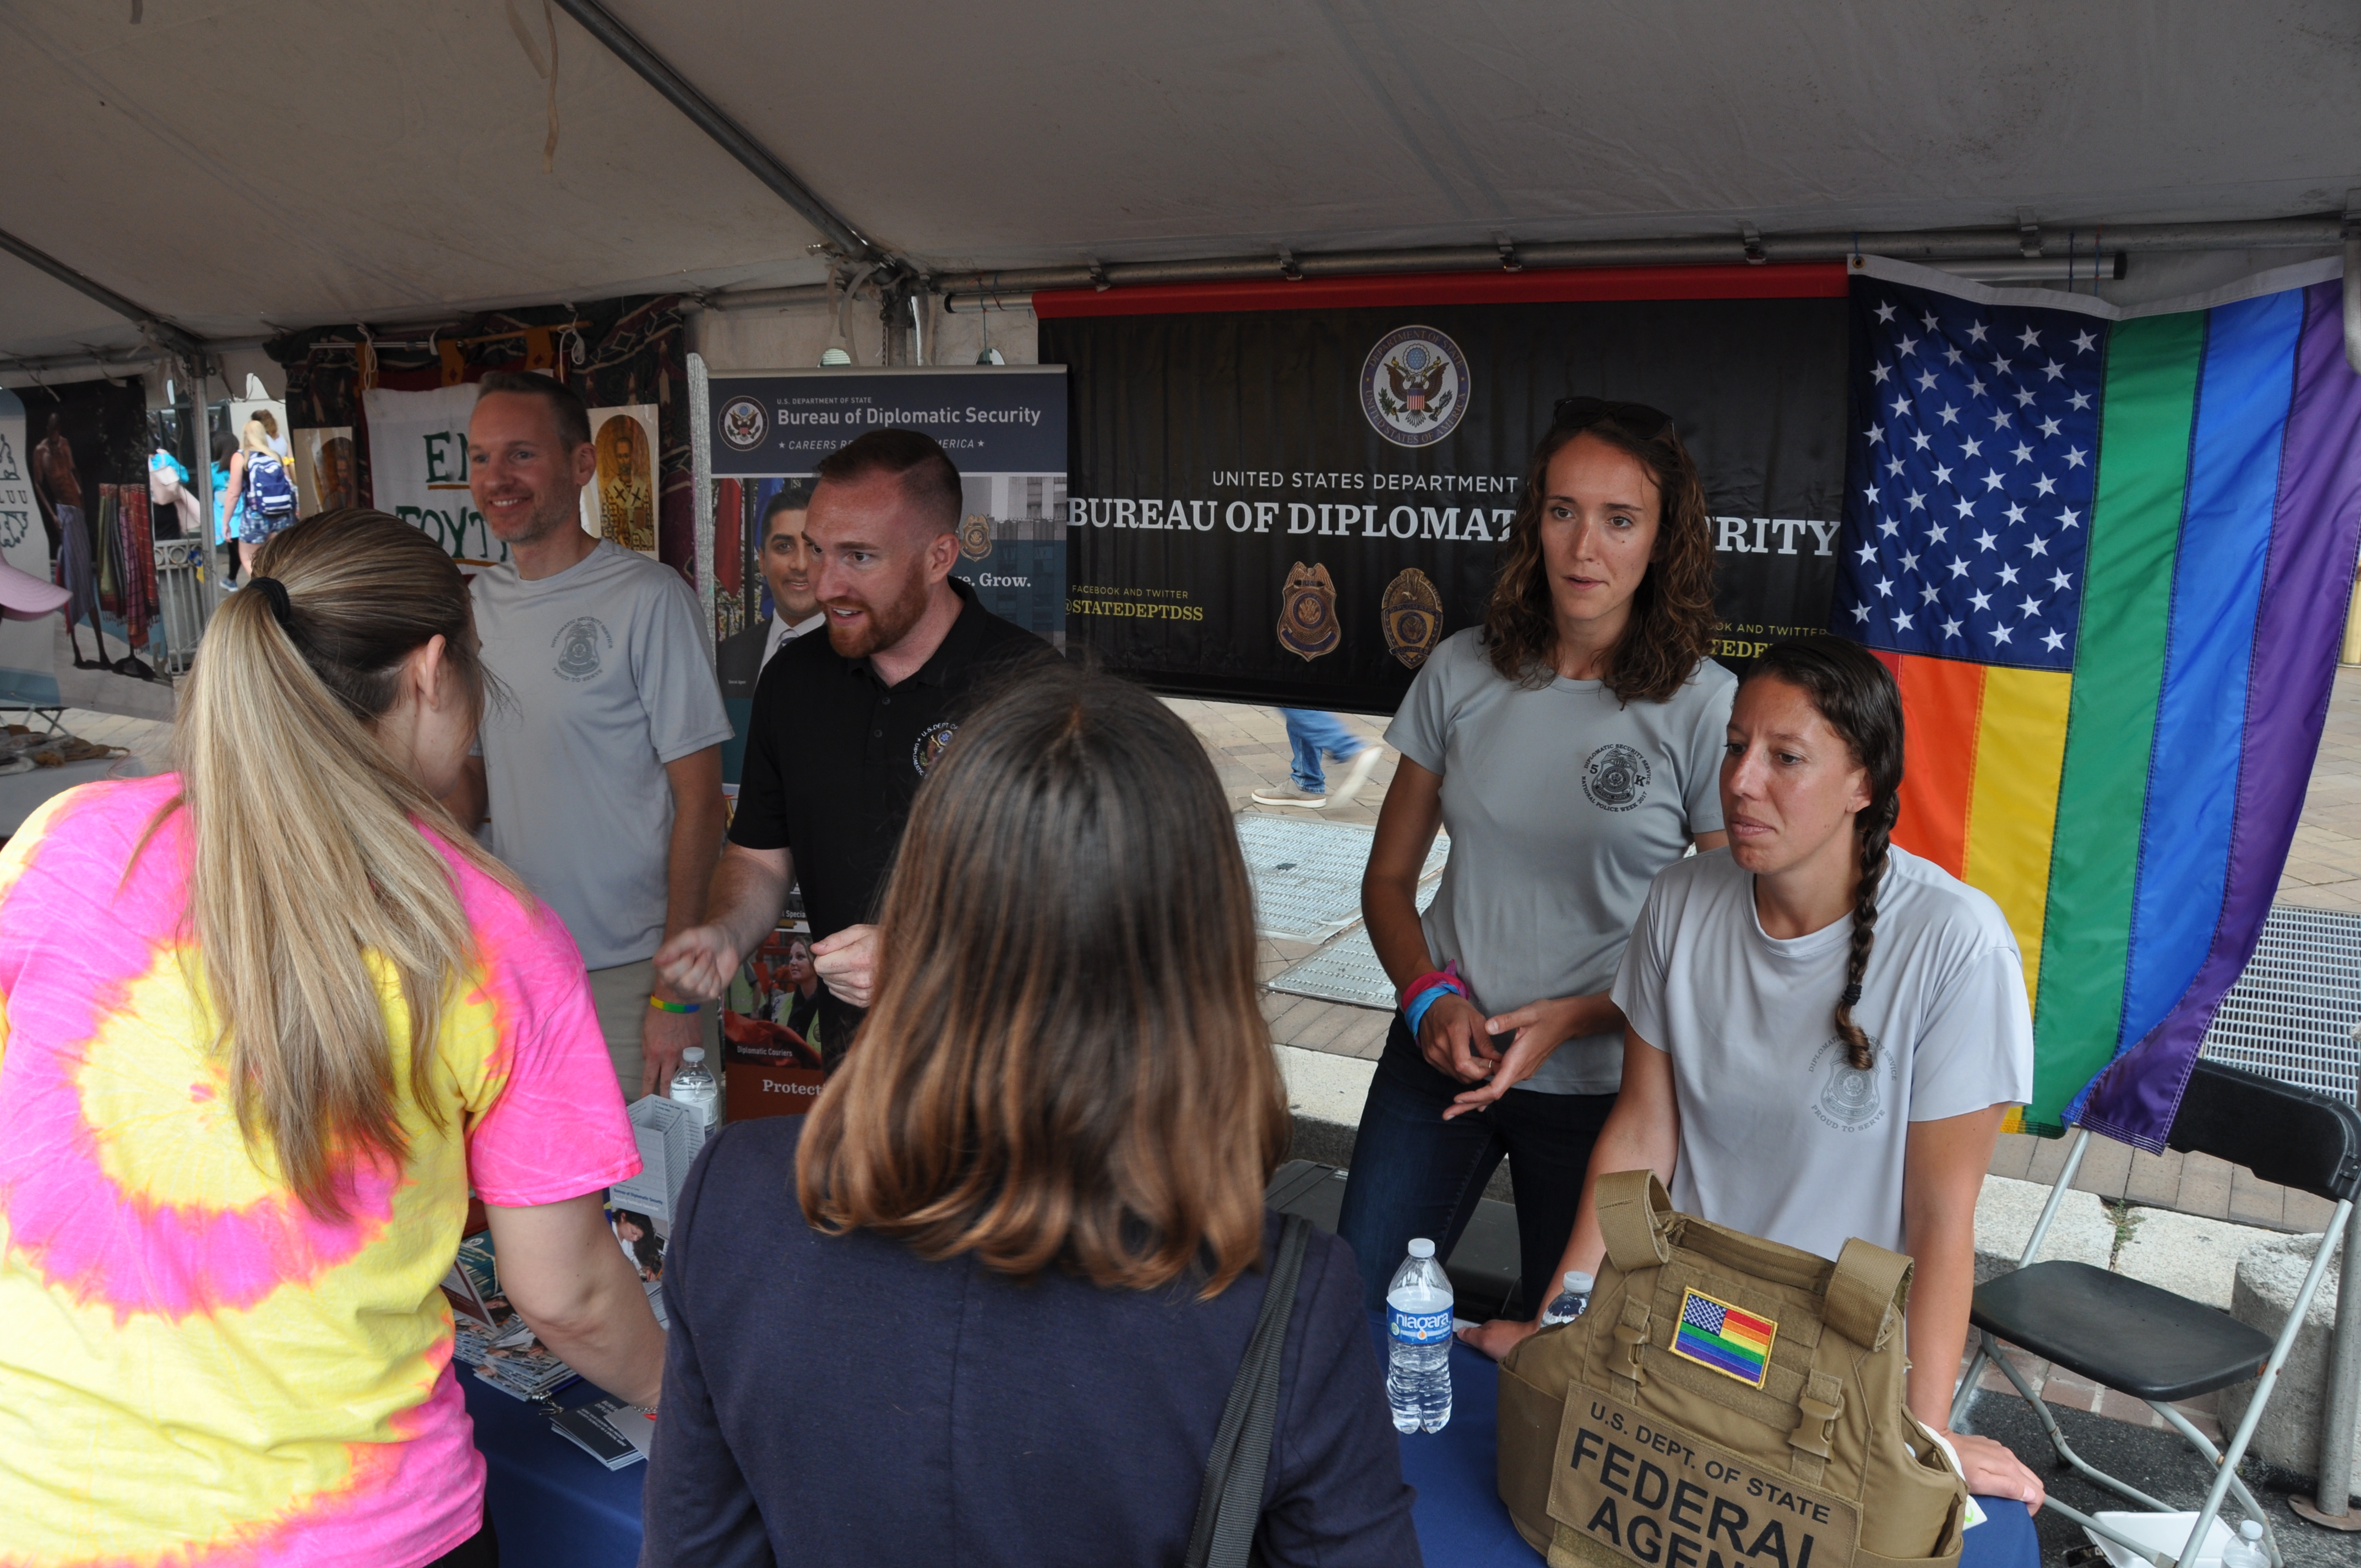 DSS personnel engage with attendees at the DSS recruitment booth during the Capital Pride Festival in Washington, D.C., June 9, 2019. (U.S. Department of State photo)